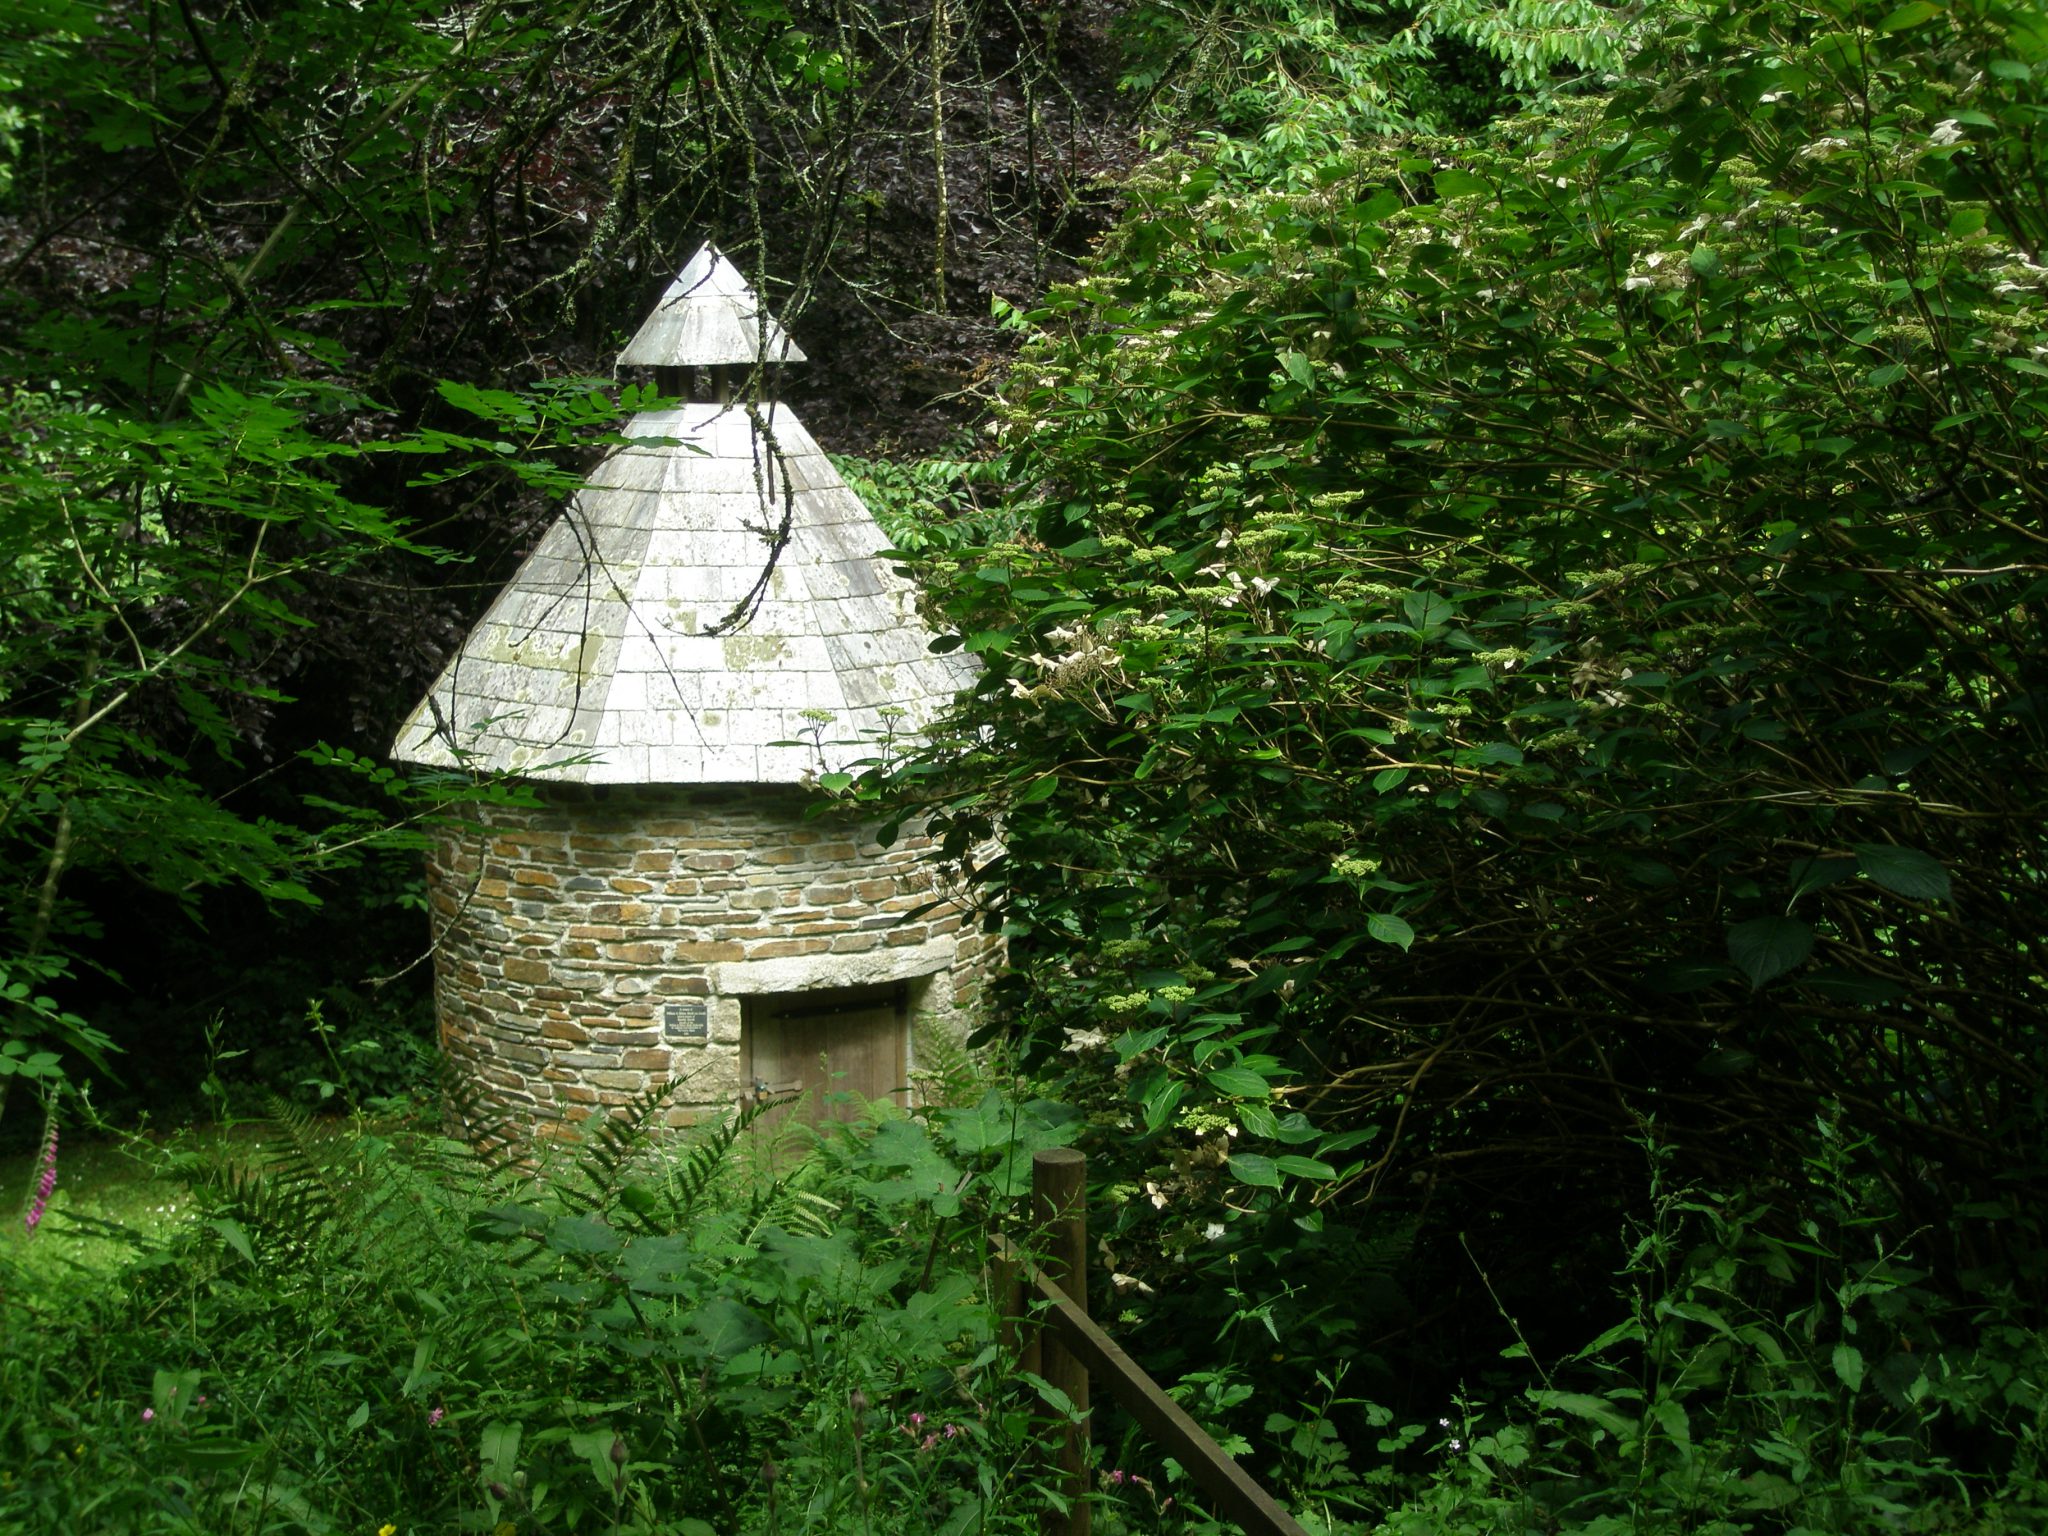 A Dovecote is tucked into the woods, north of the Summer Garden